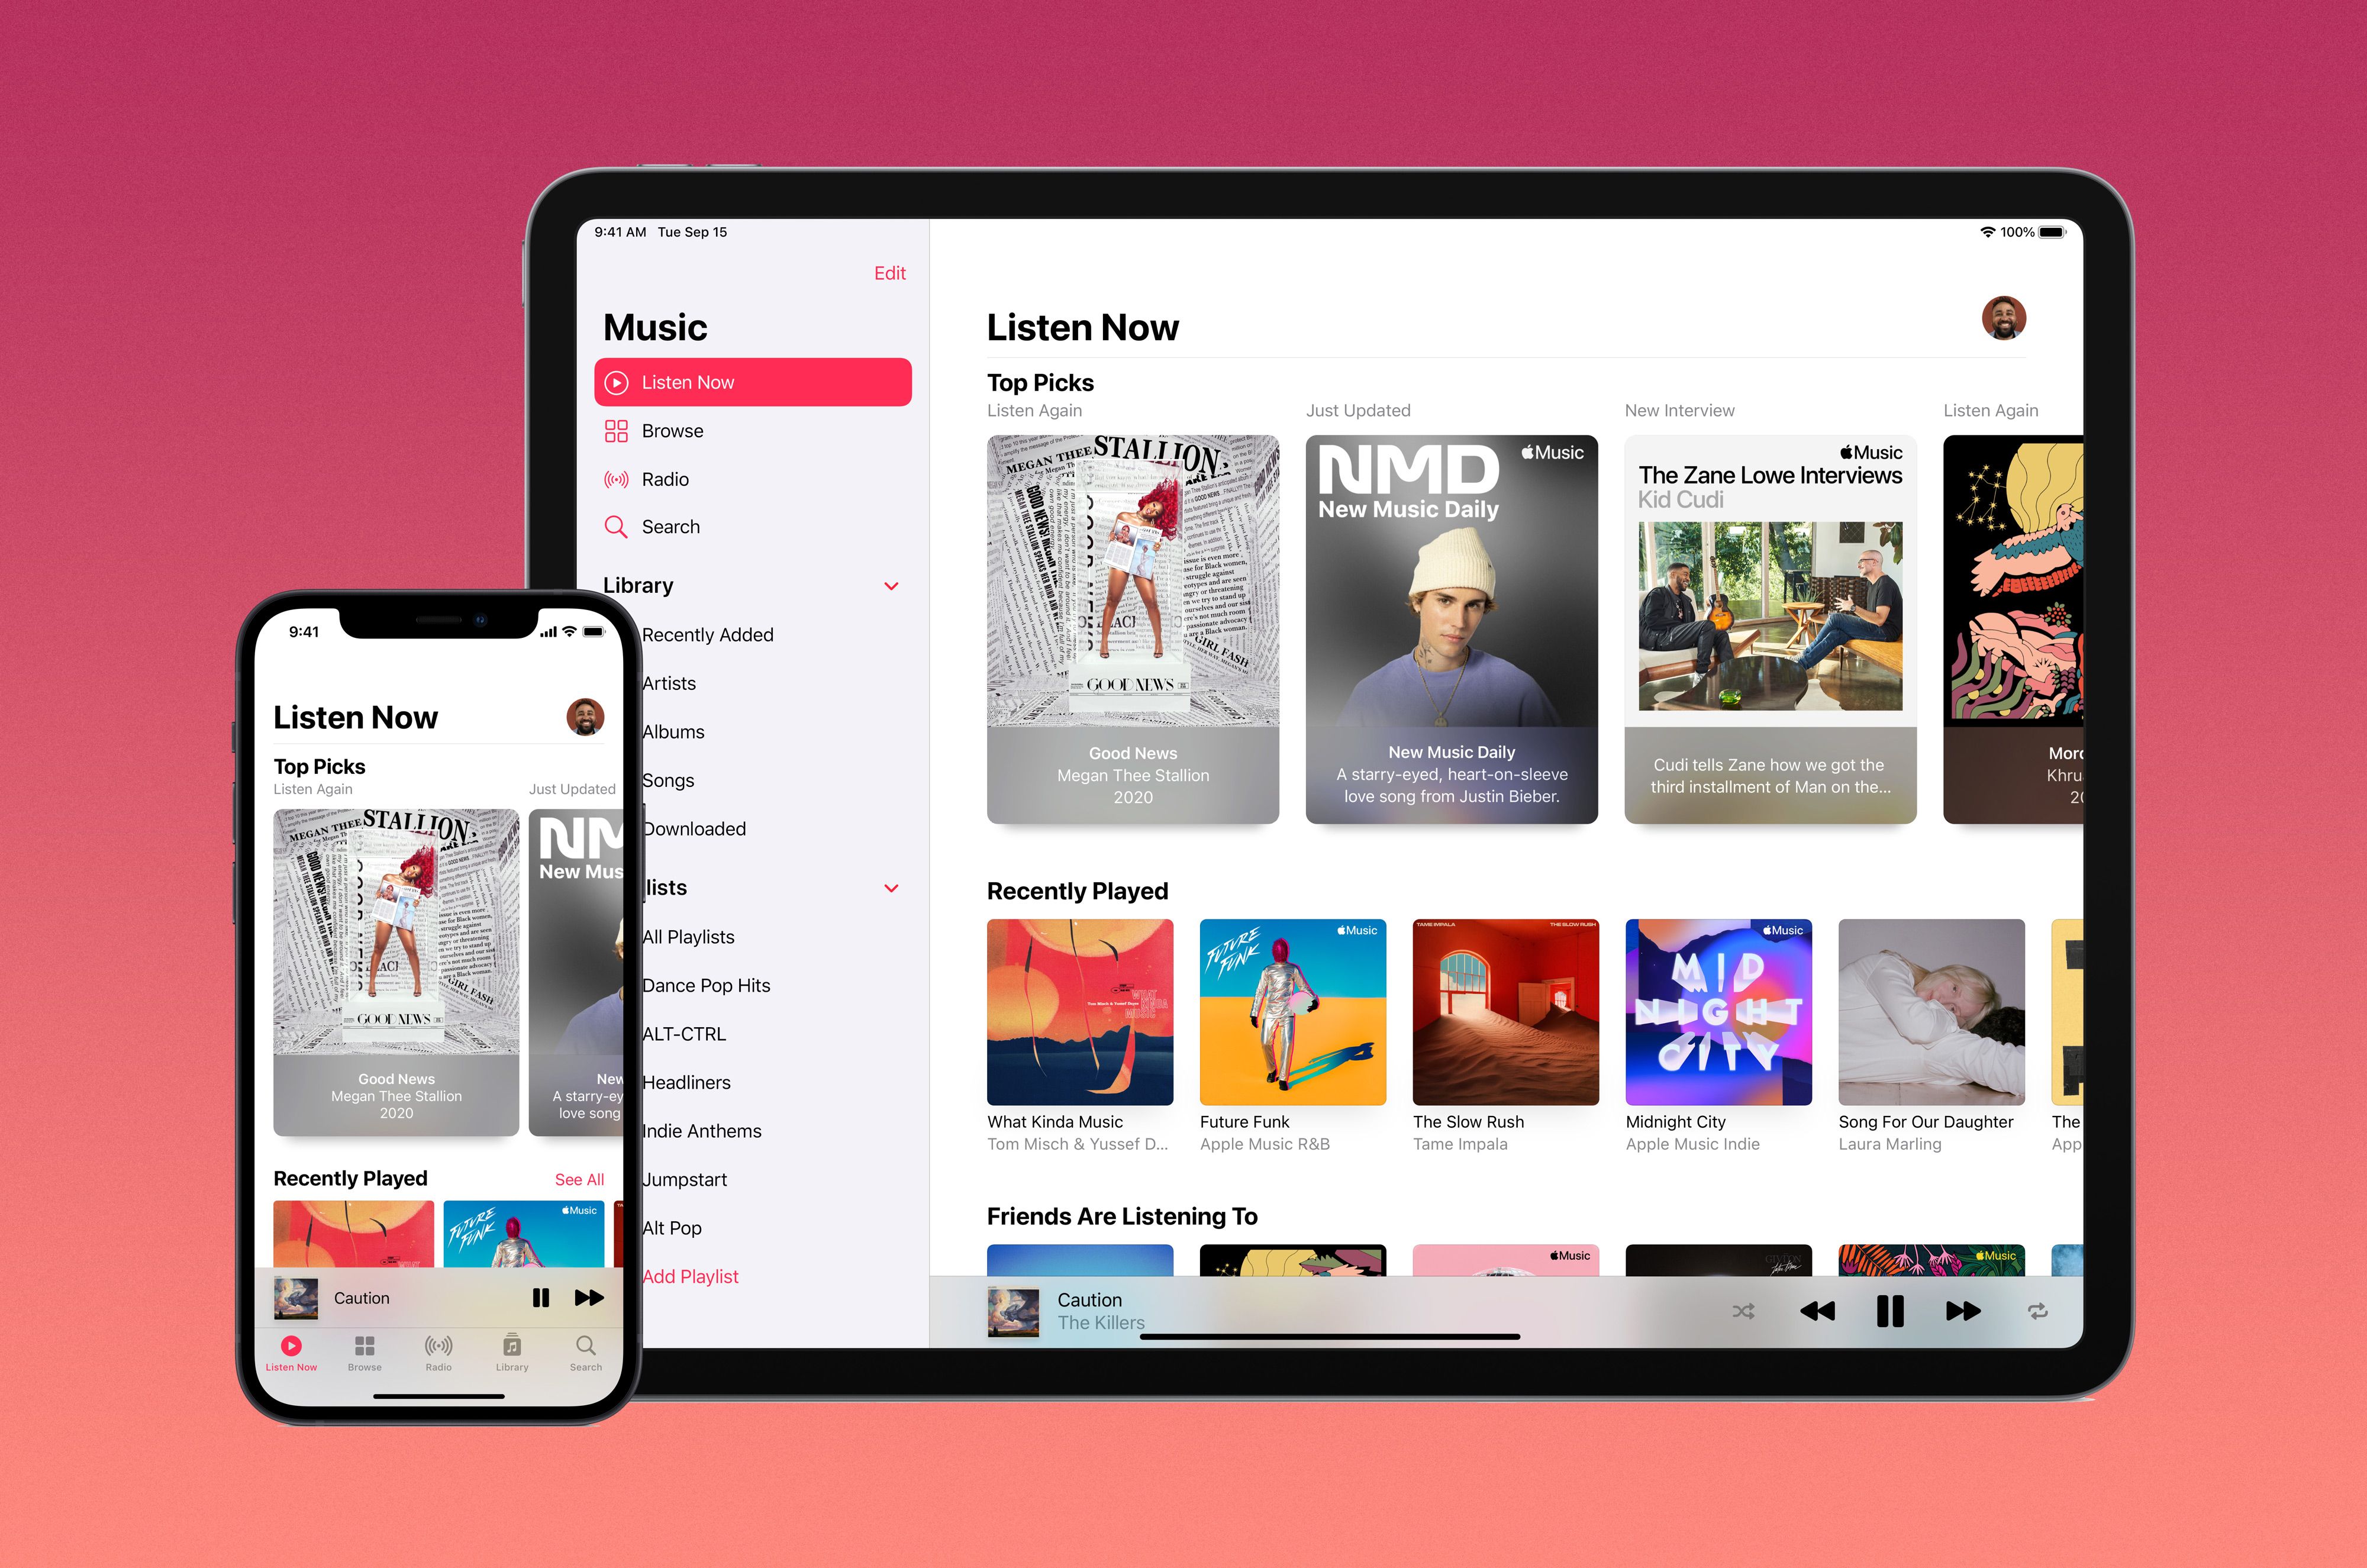 How to play songs, albums, and playlists on repeat in Apple Music